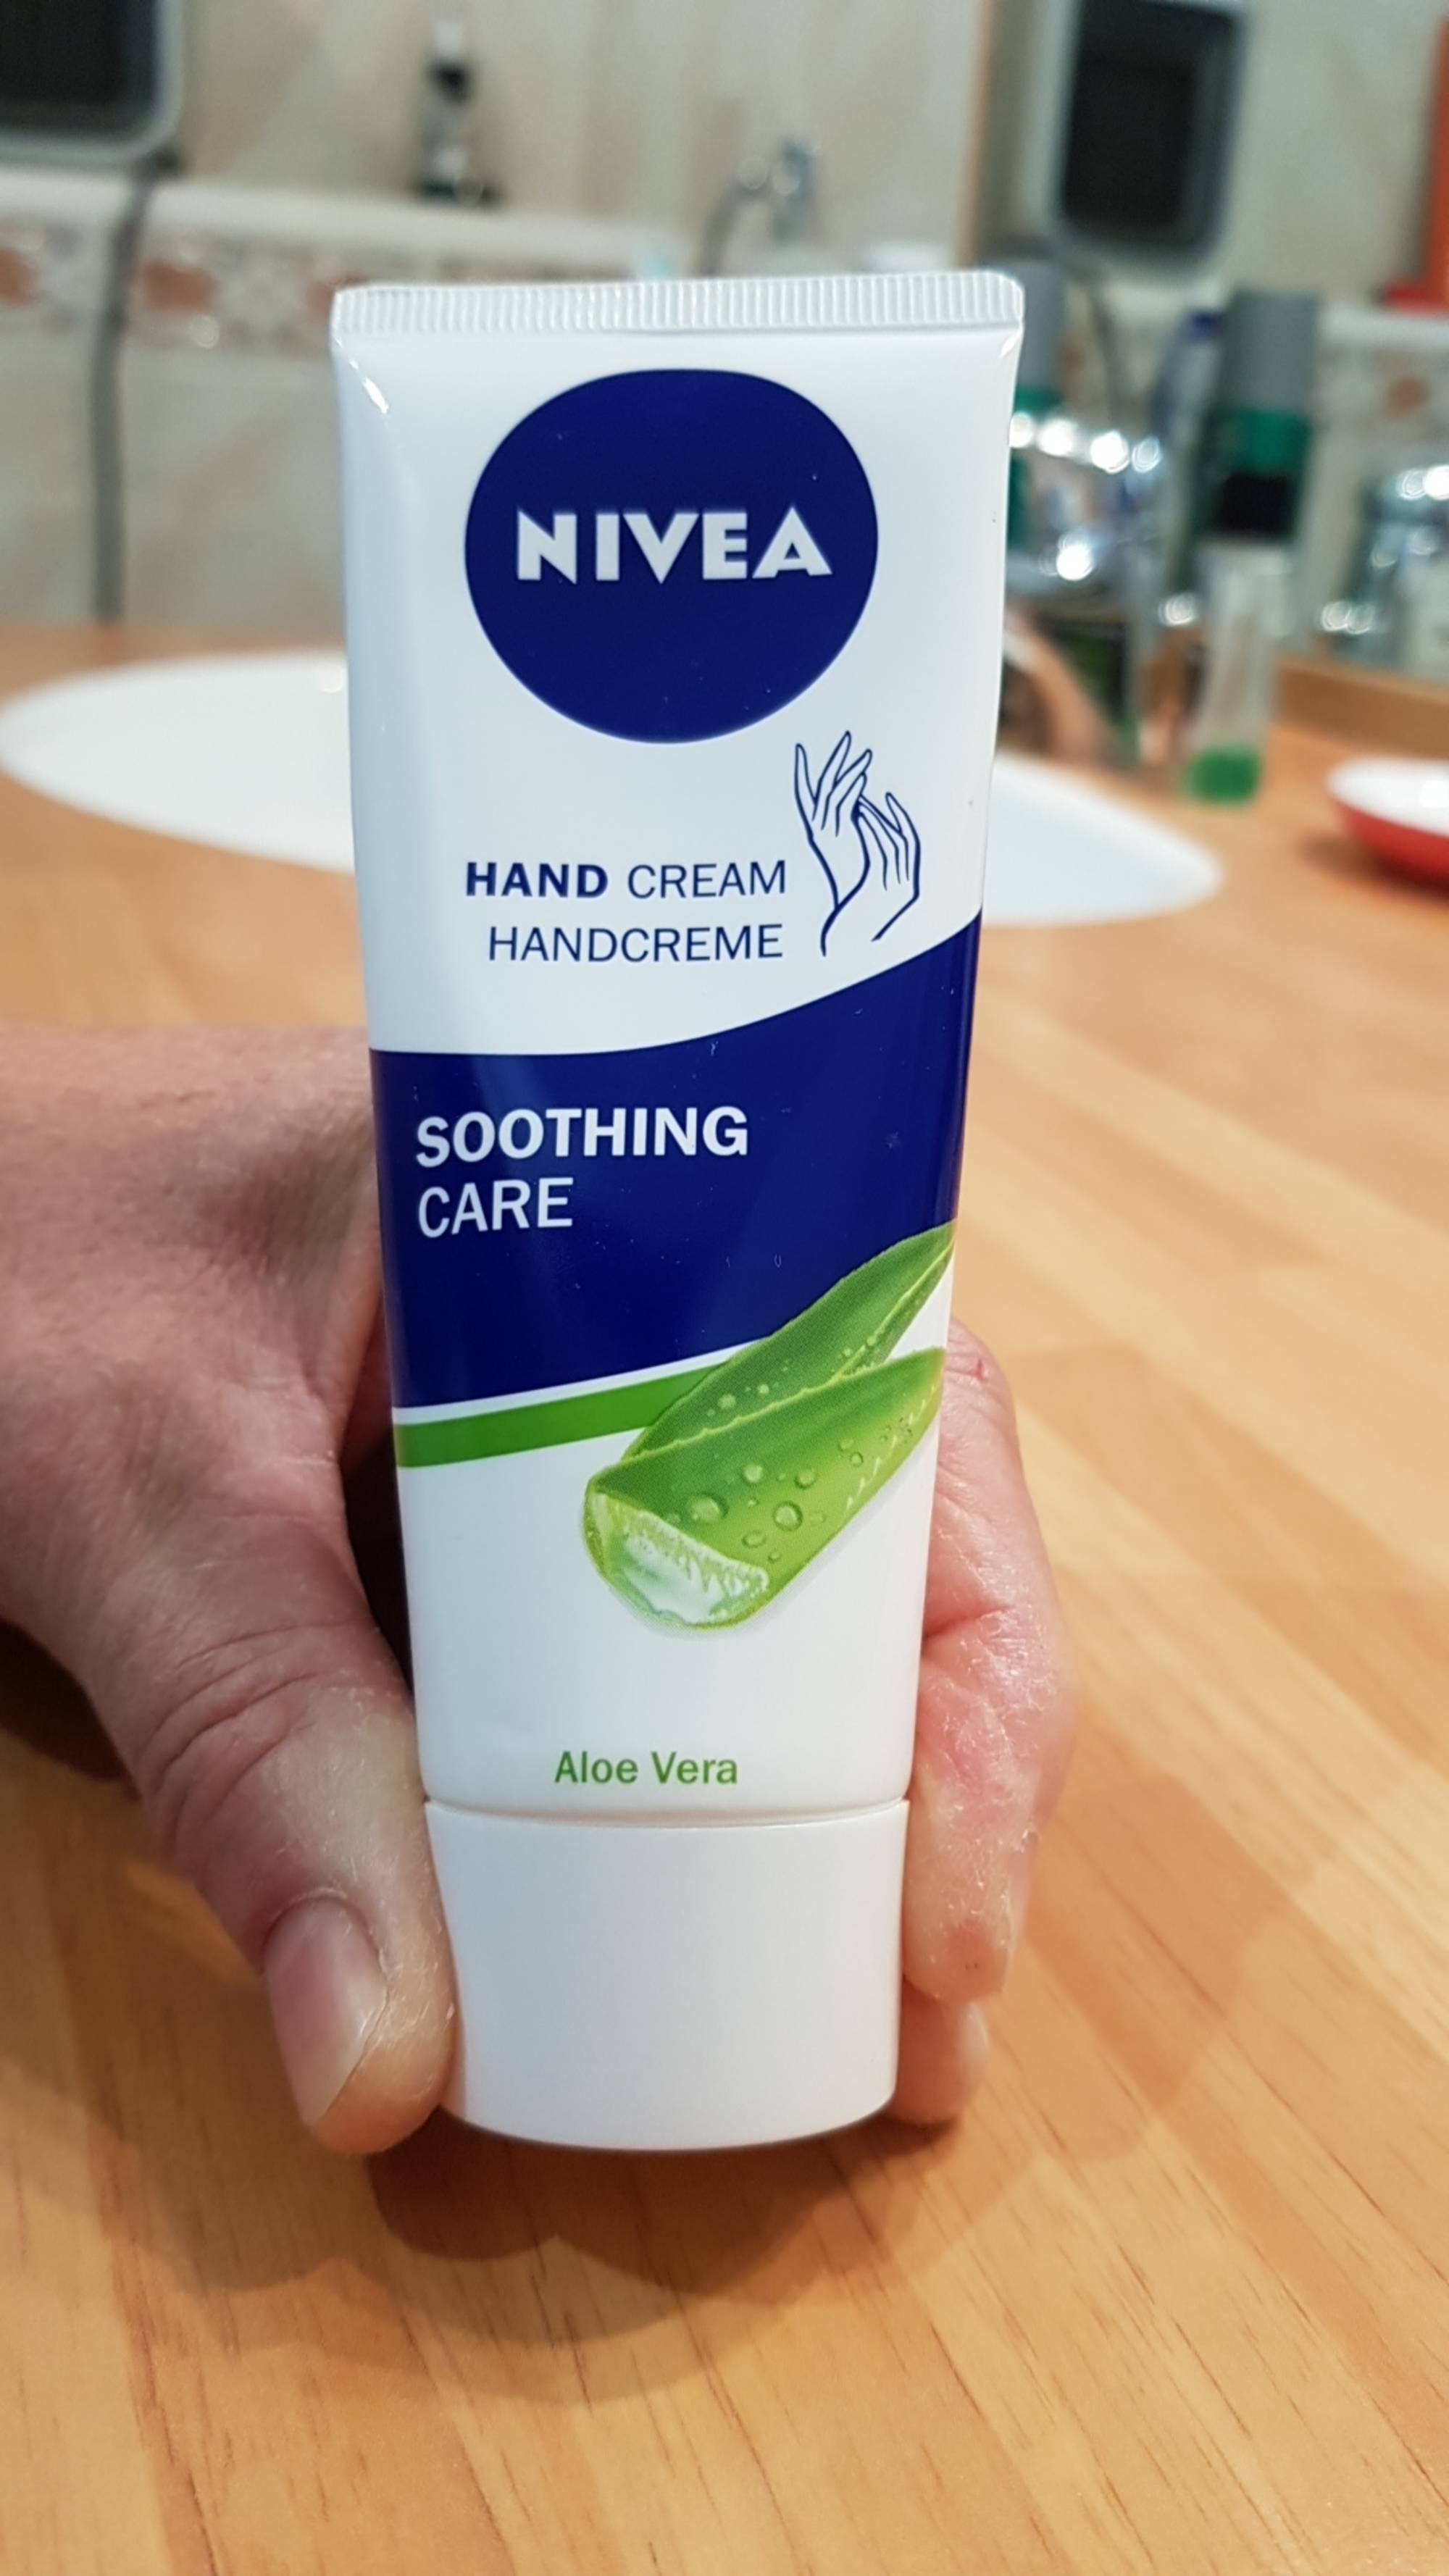 NIVEA - Soothing care - Hand cream